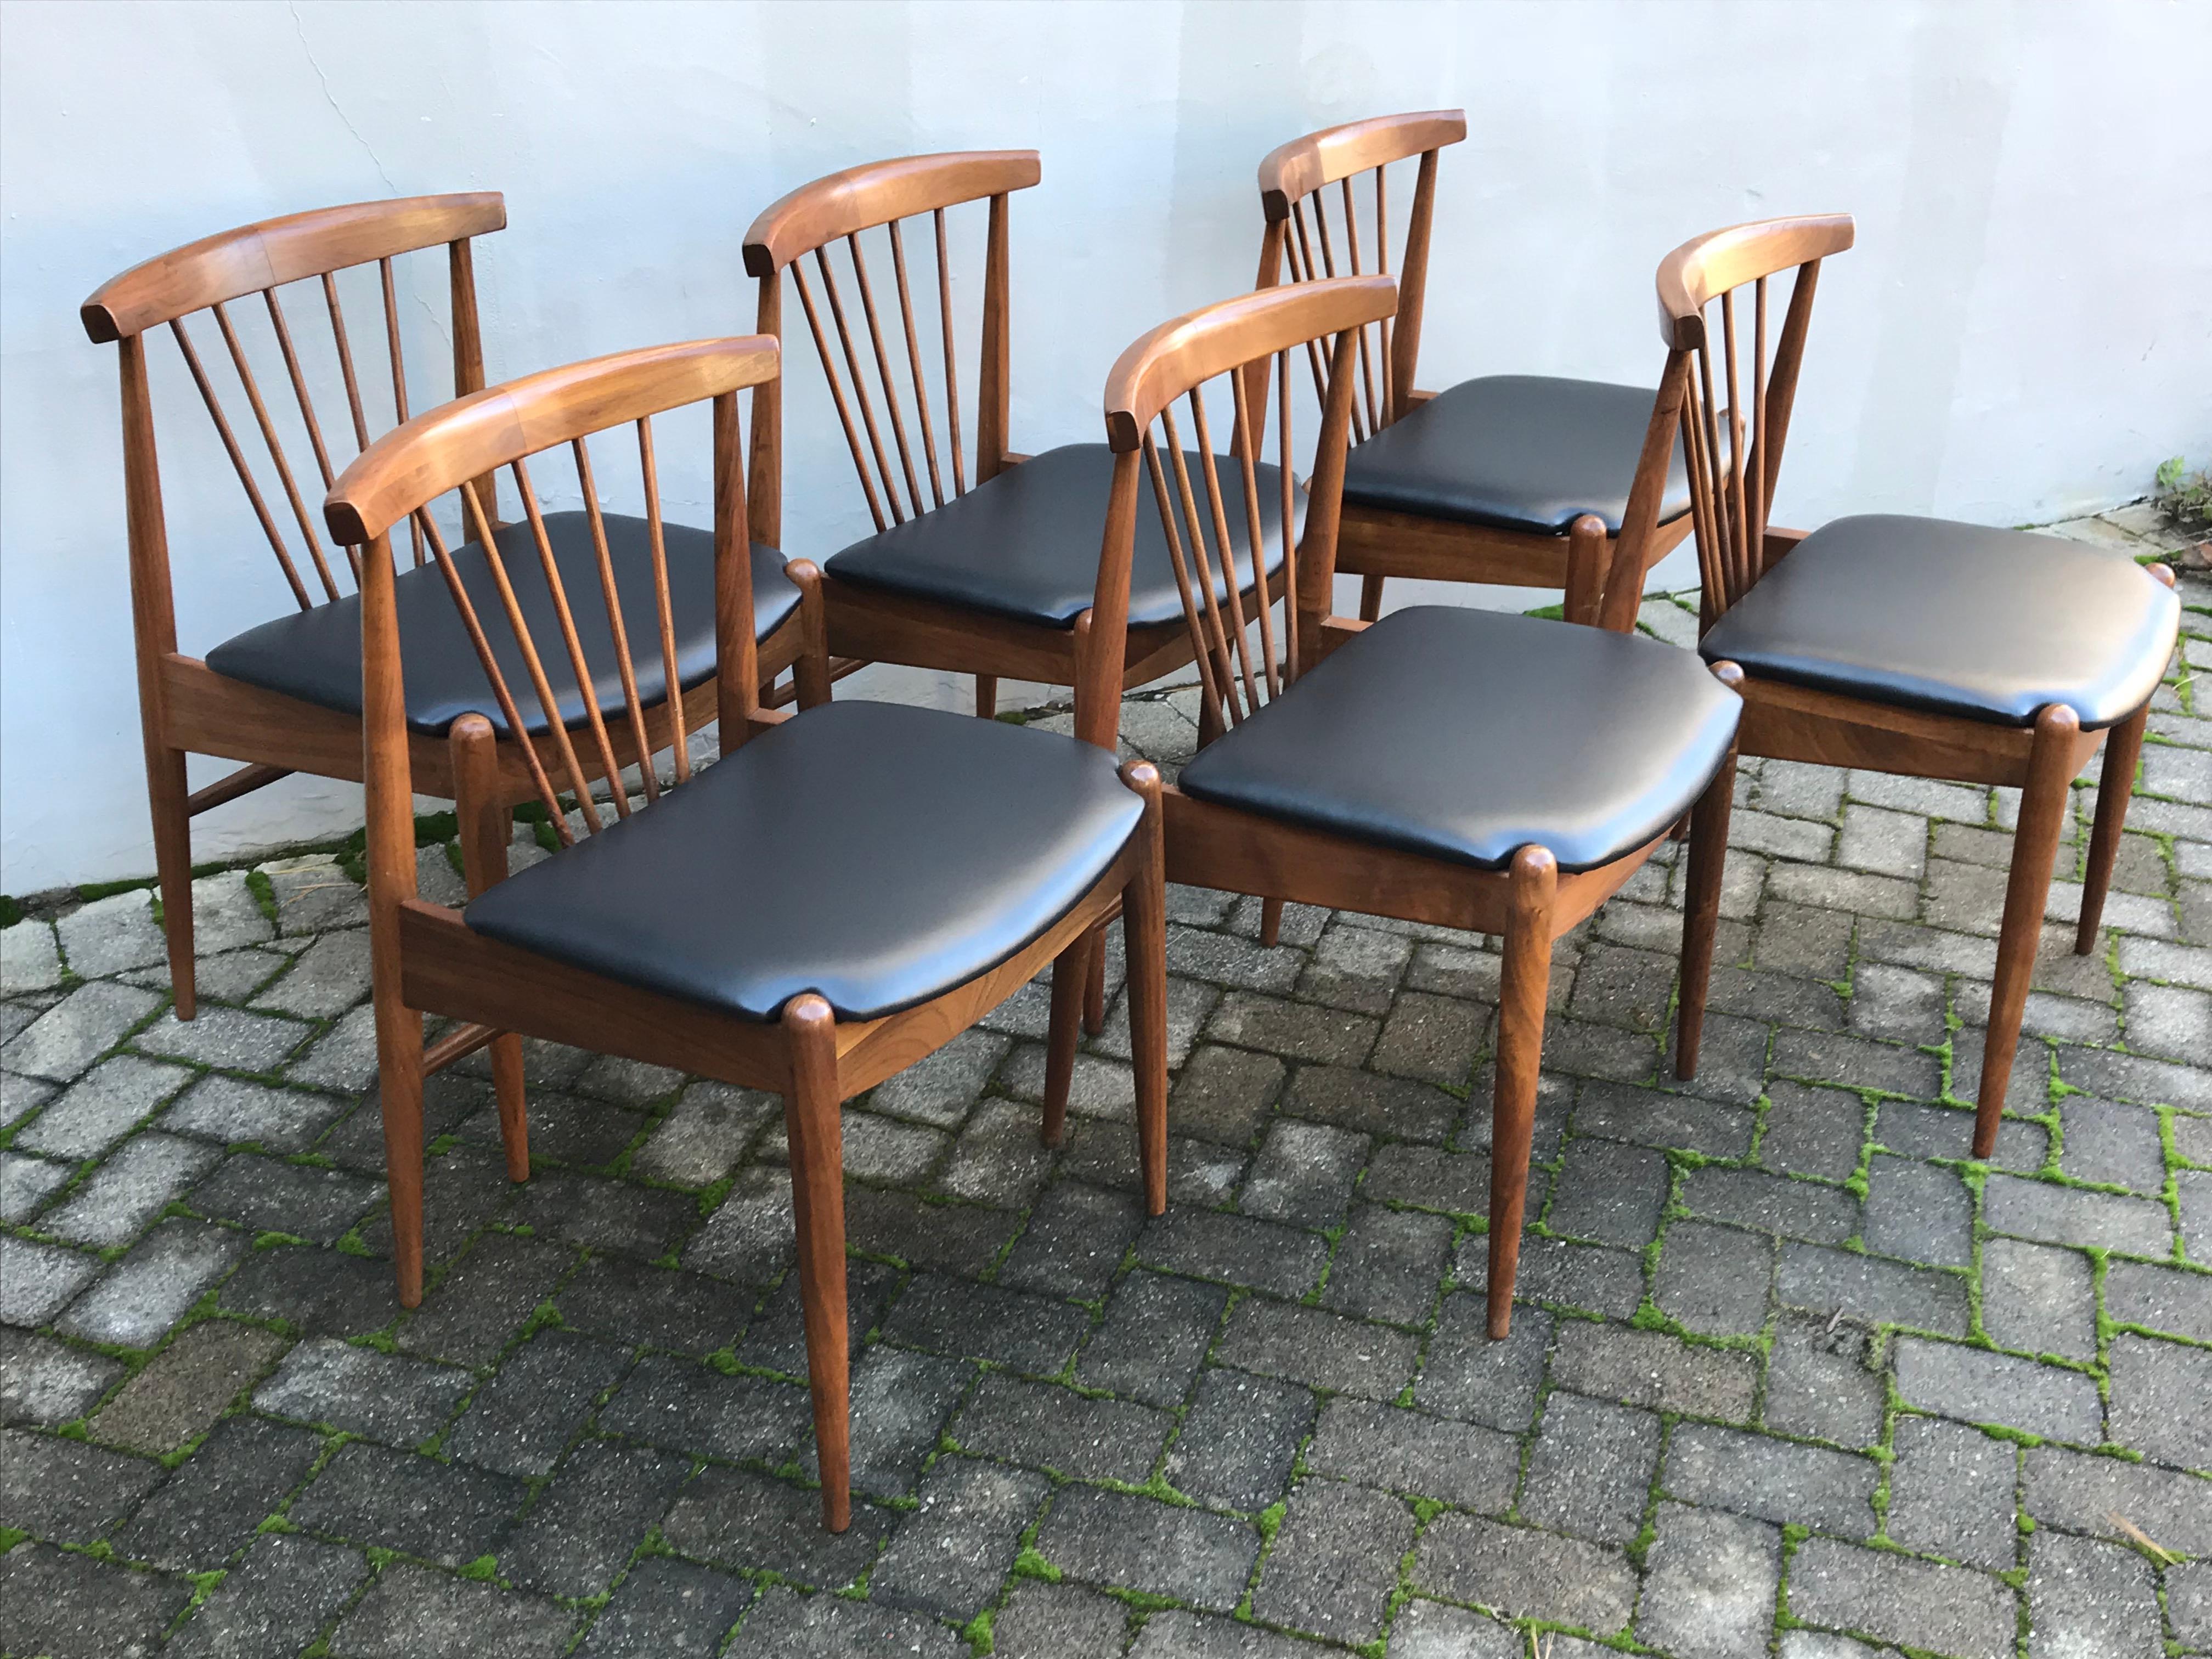 Beautiful set of six Mid-Century Modern dining chairs with spindle backs, recently reupholstered in high quality black vinyl.